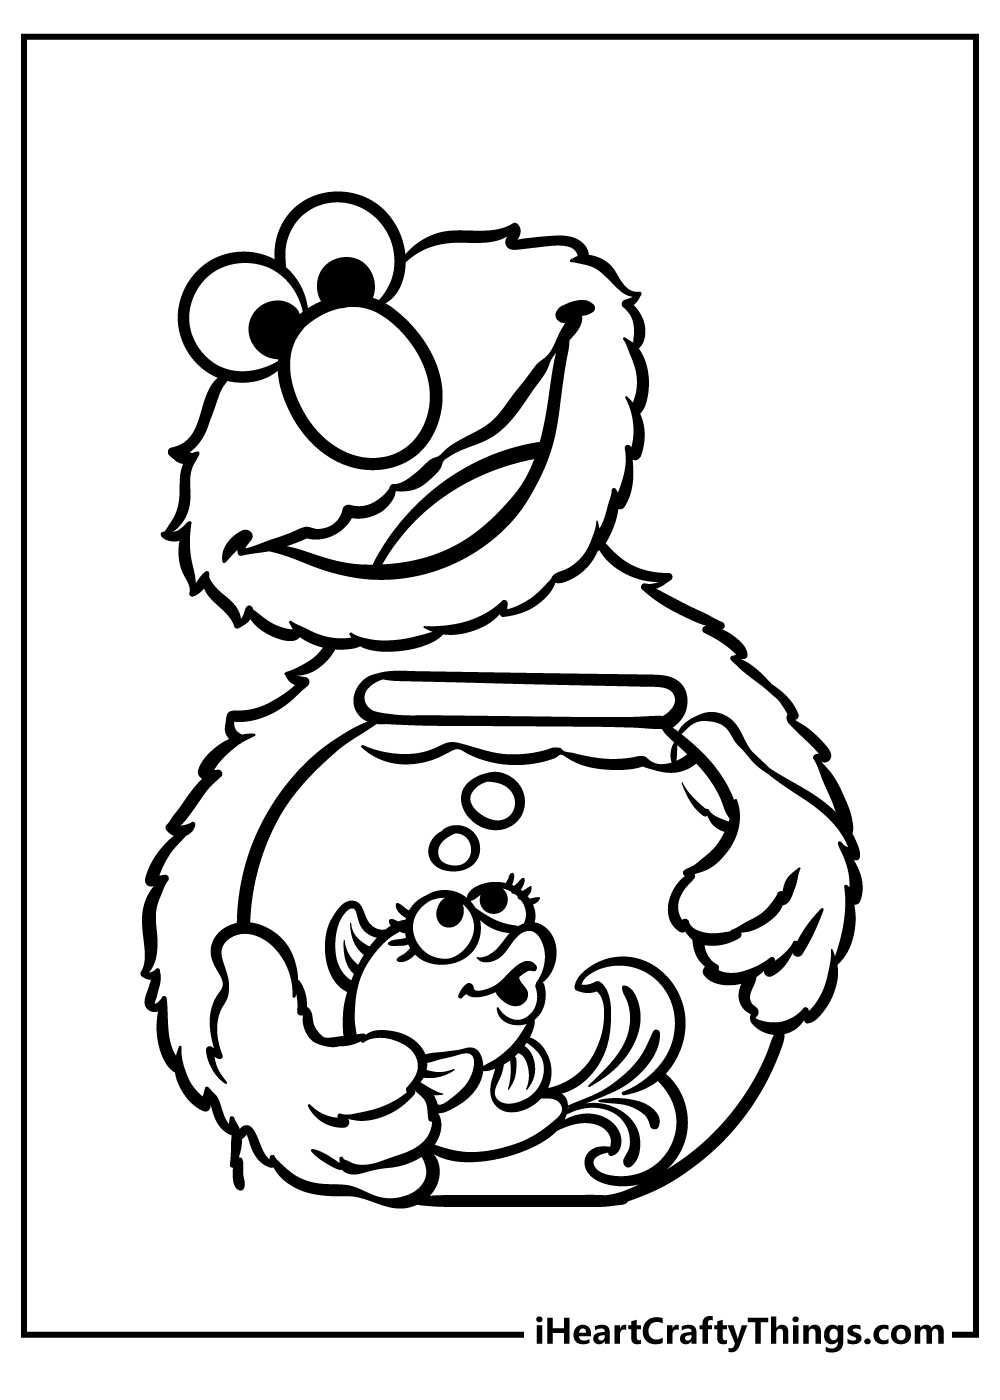 Sesame Street Coloring Pages for preschoolers free printable